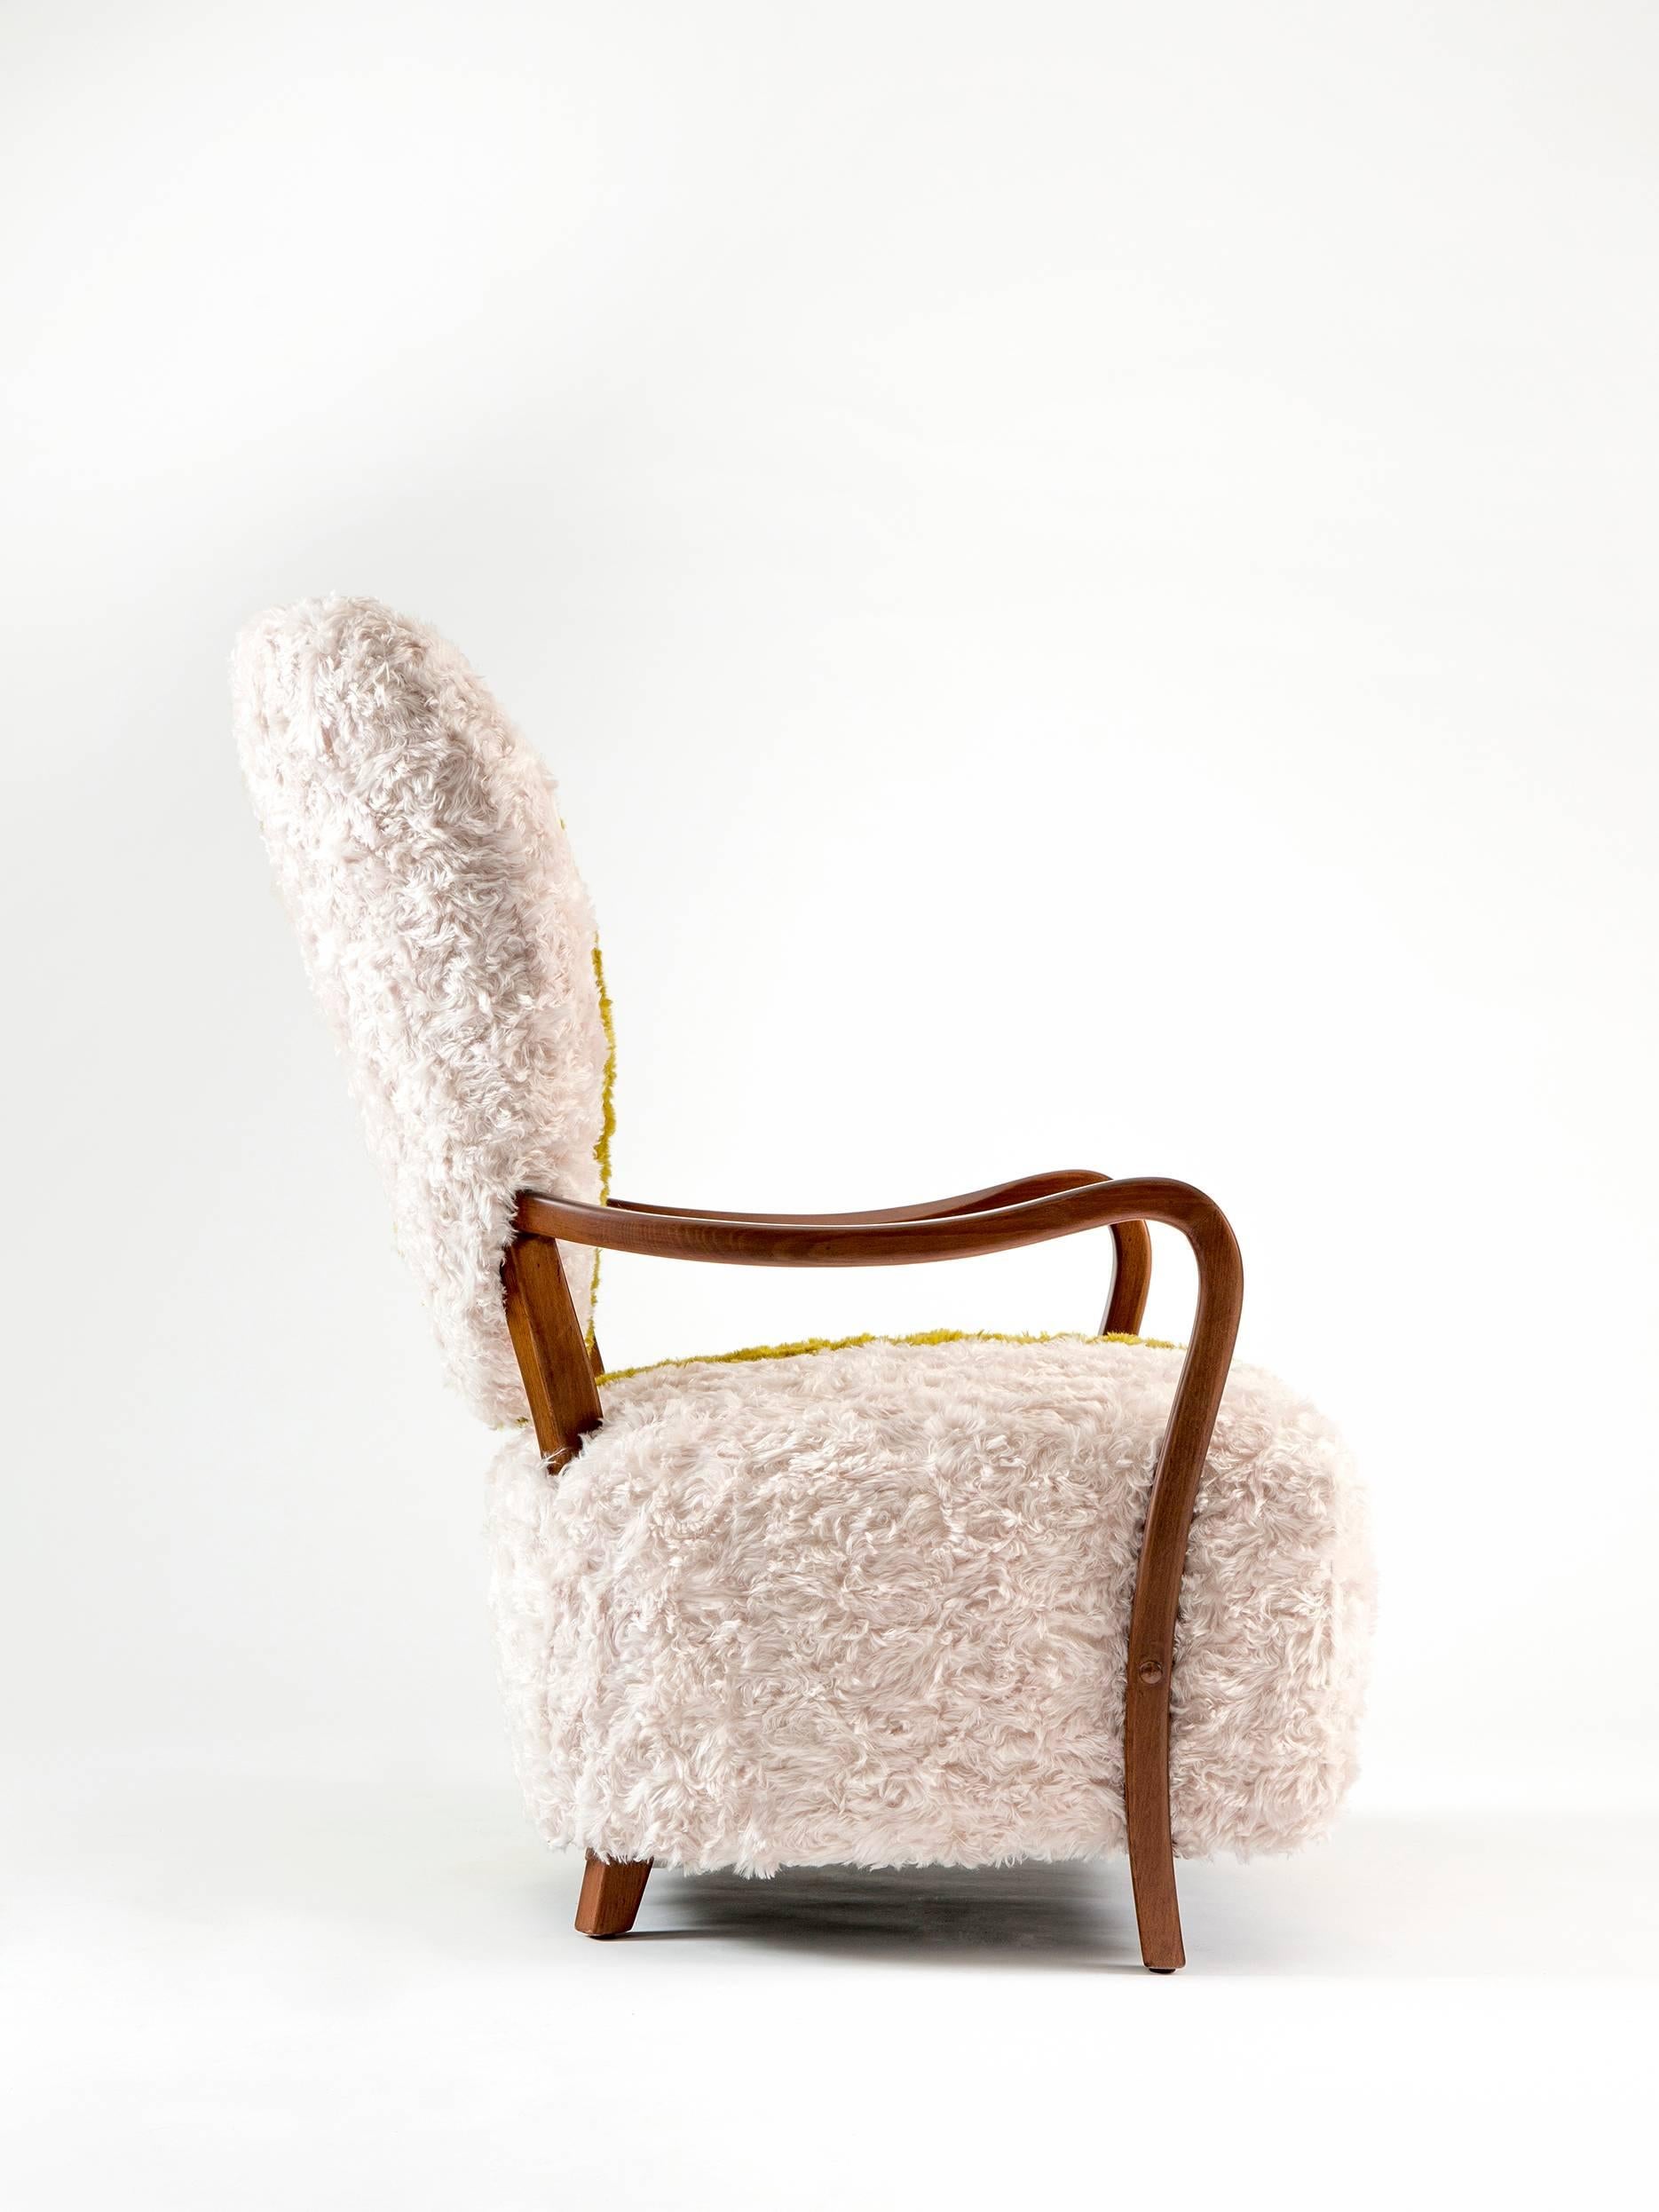 Hand-Crafted Contemporary Uni Armchair with Heart Shaped Back and Yellow and White Mohair For Sale